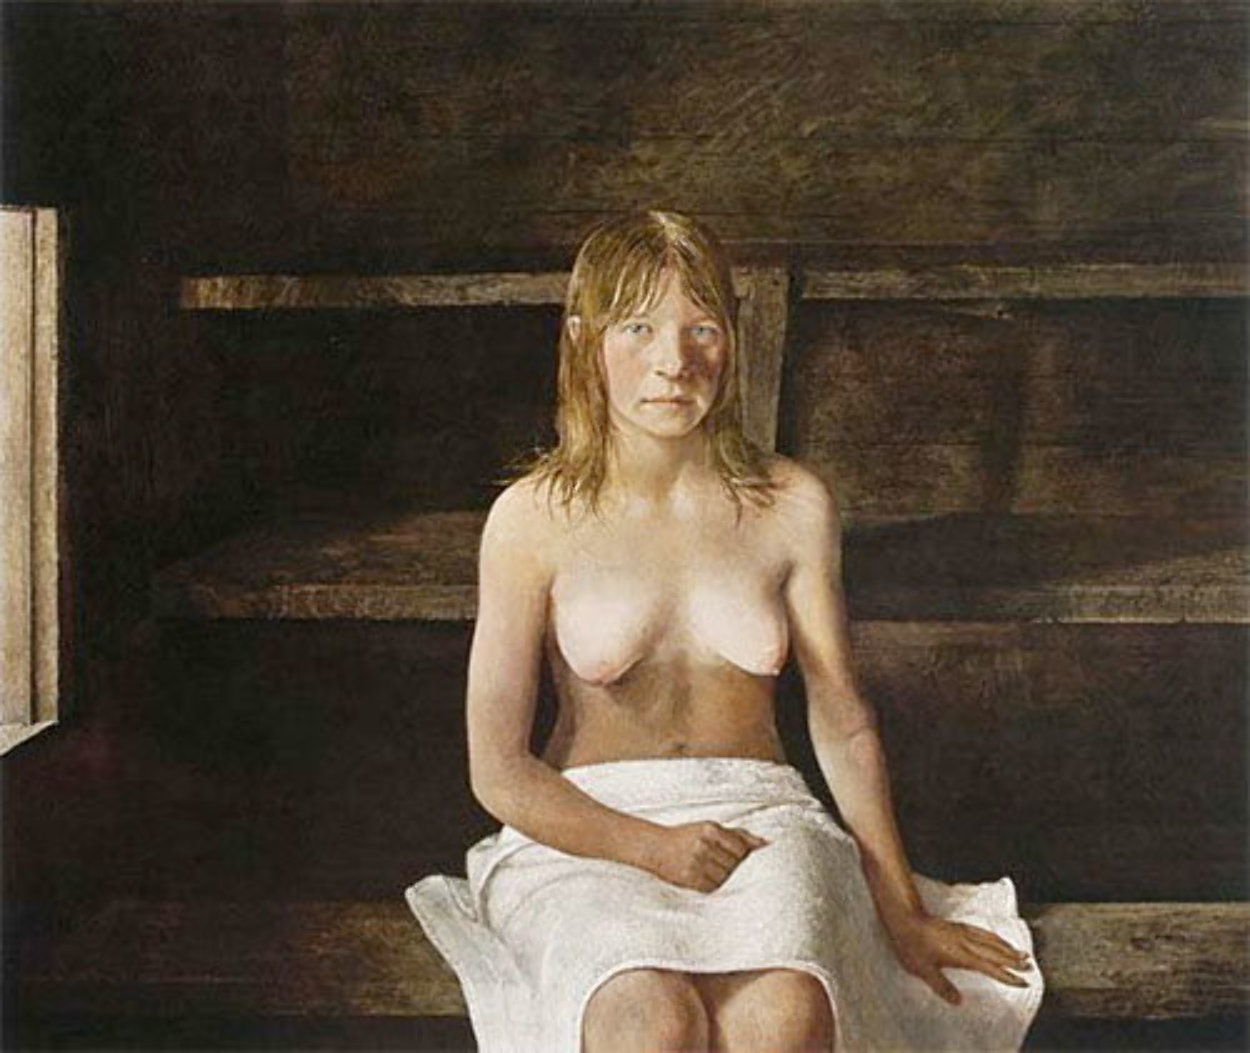 Sauna HS 1979 Limited Edition Print by Andrew Wyeth